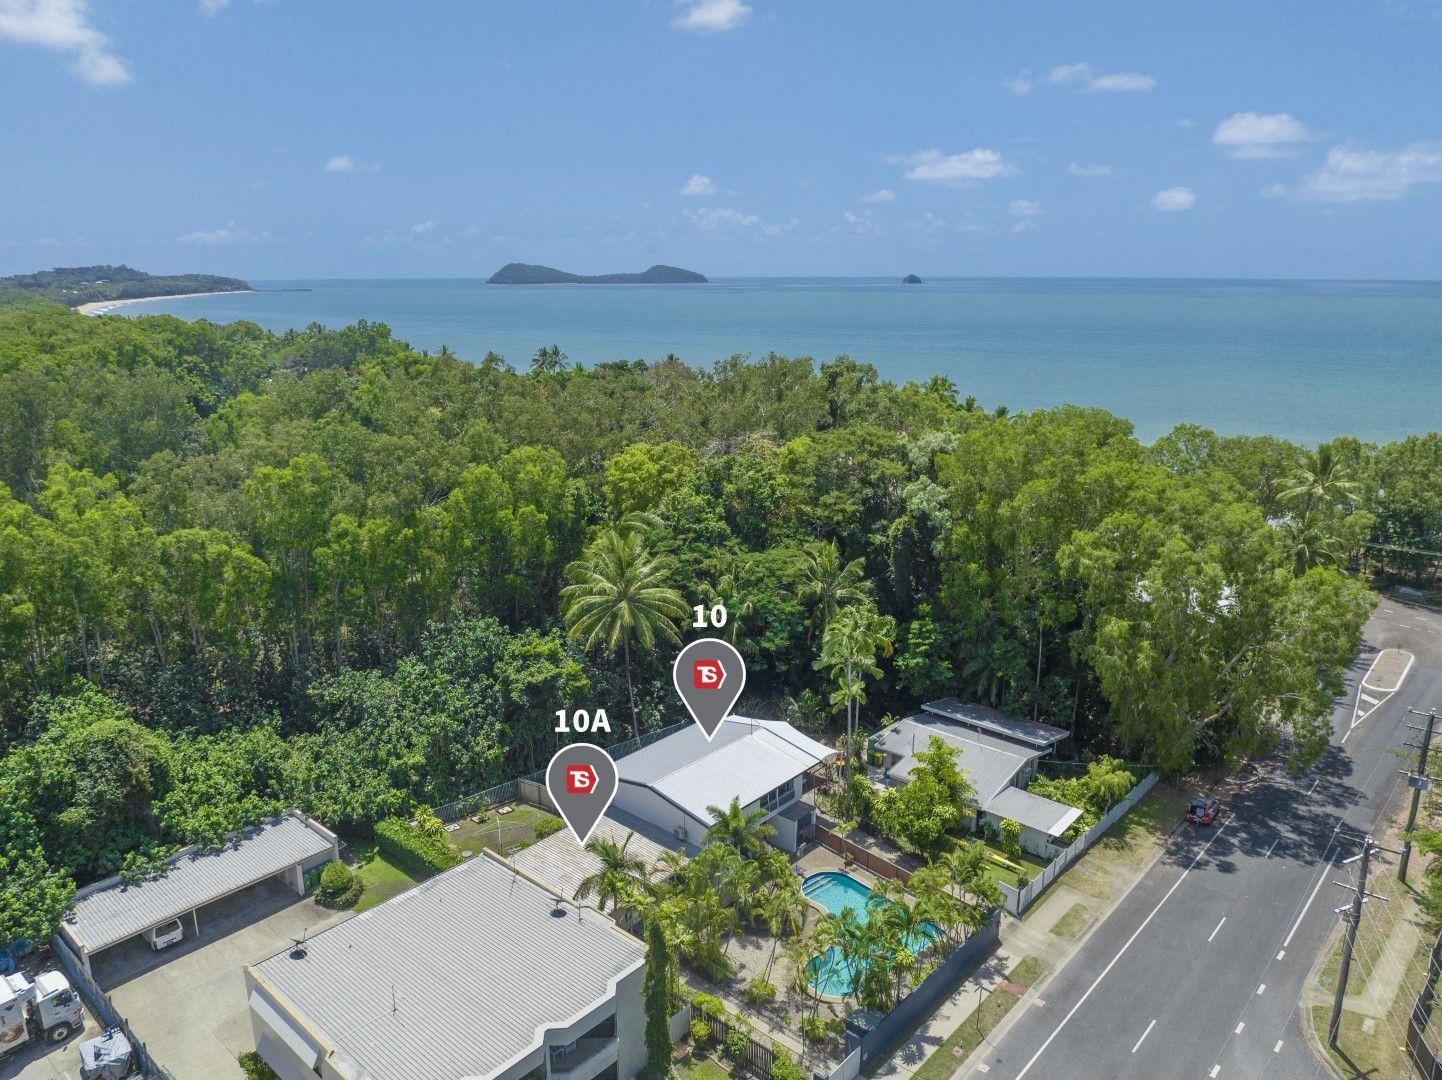 5 bedrooms Semi-Detached in 10 & 10a Clifton Road CLIFTON BEACH QLD, 4879